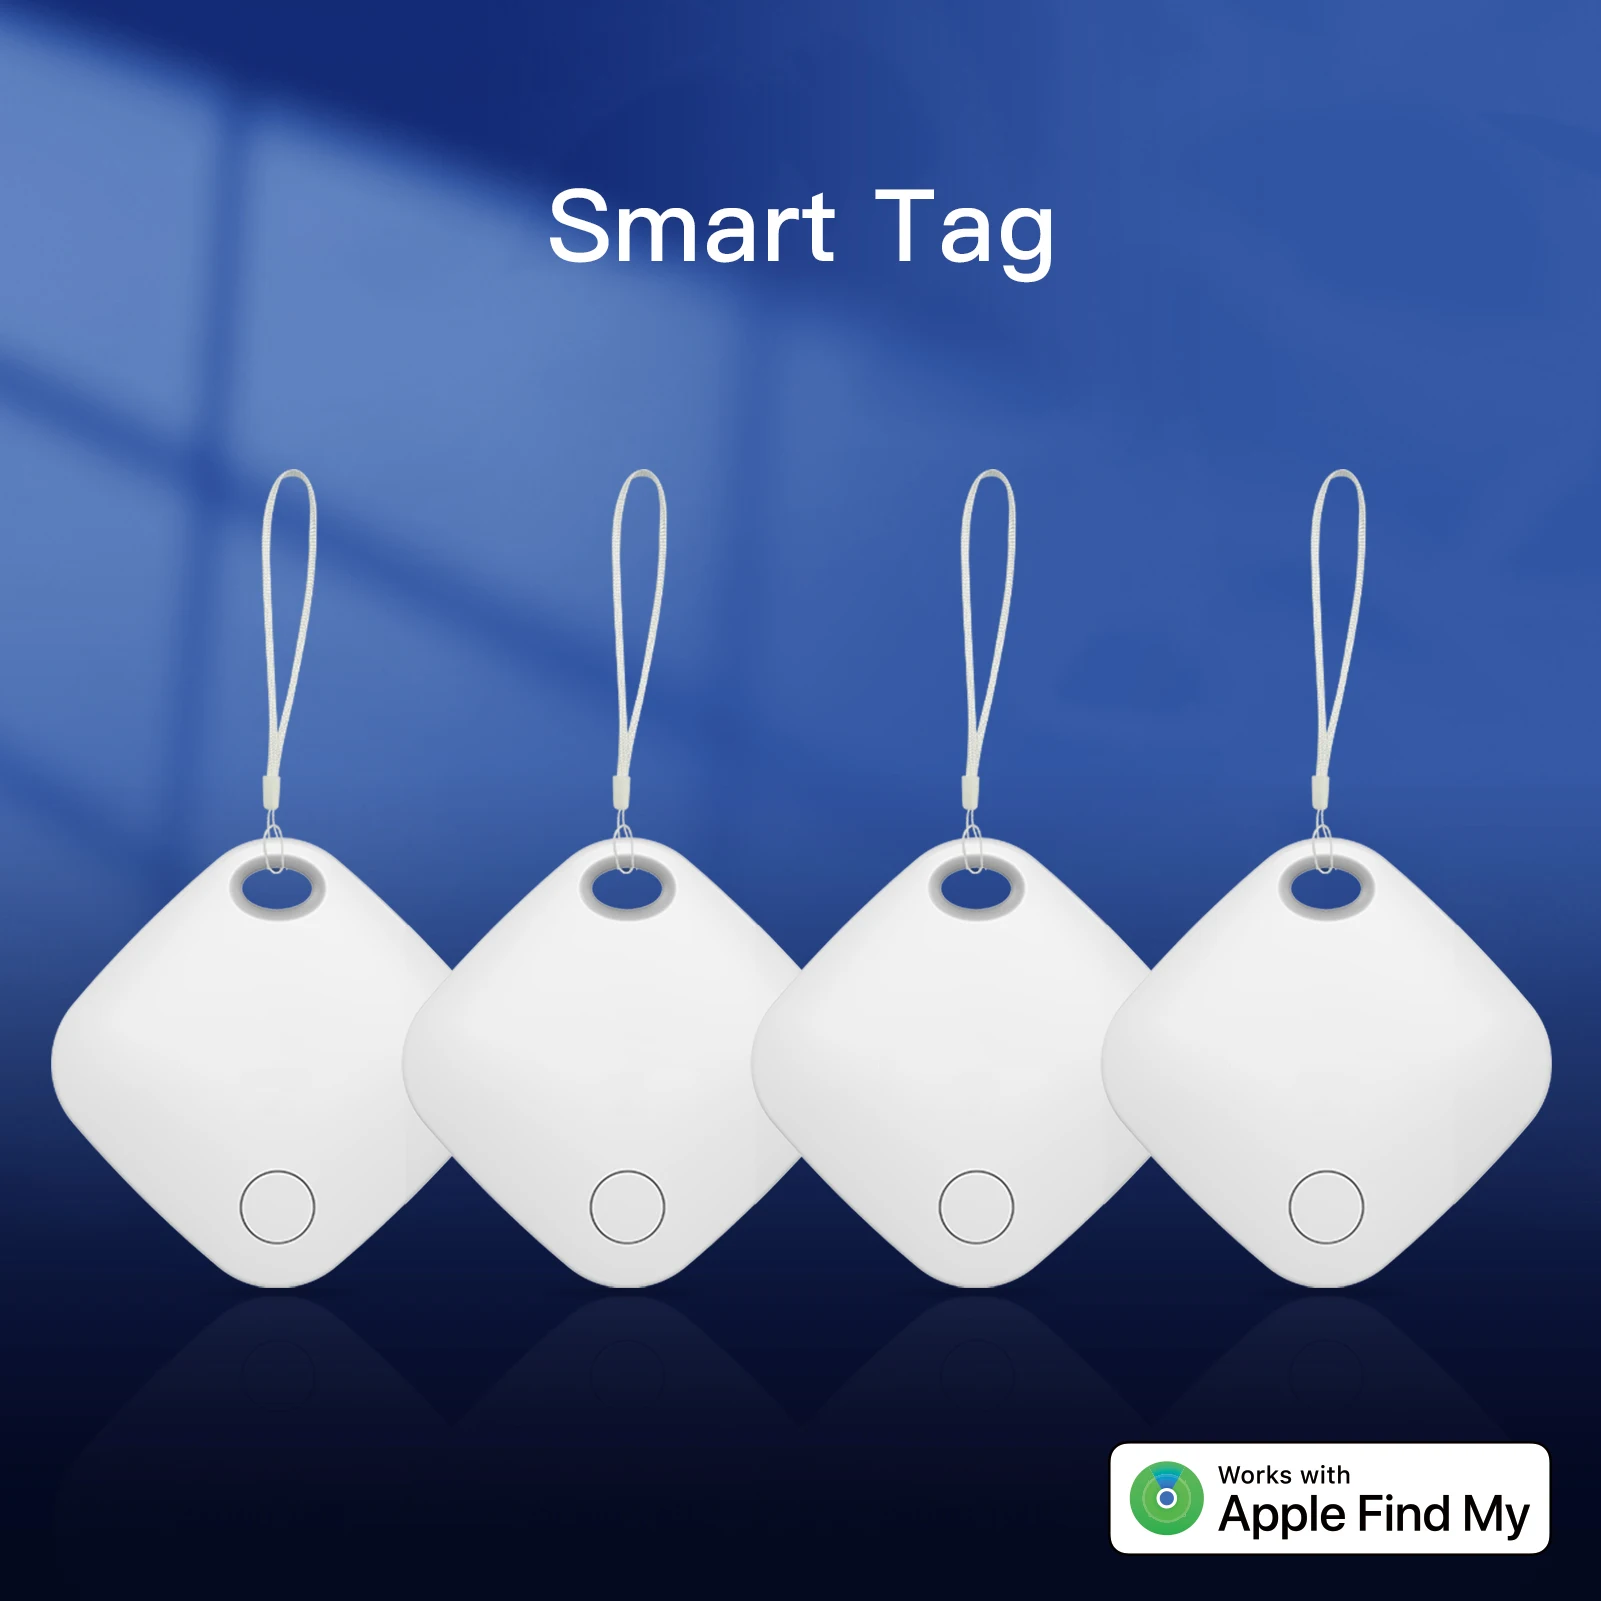 Smart Air Tag For Apple Find My Mini Smart Tracker GPS Tracker Reverse  Track Lost Mobile Phone Pet Children IOS System Smart Tag